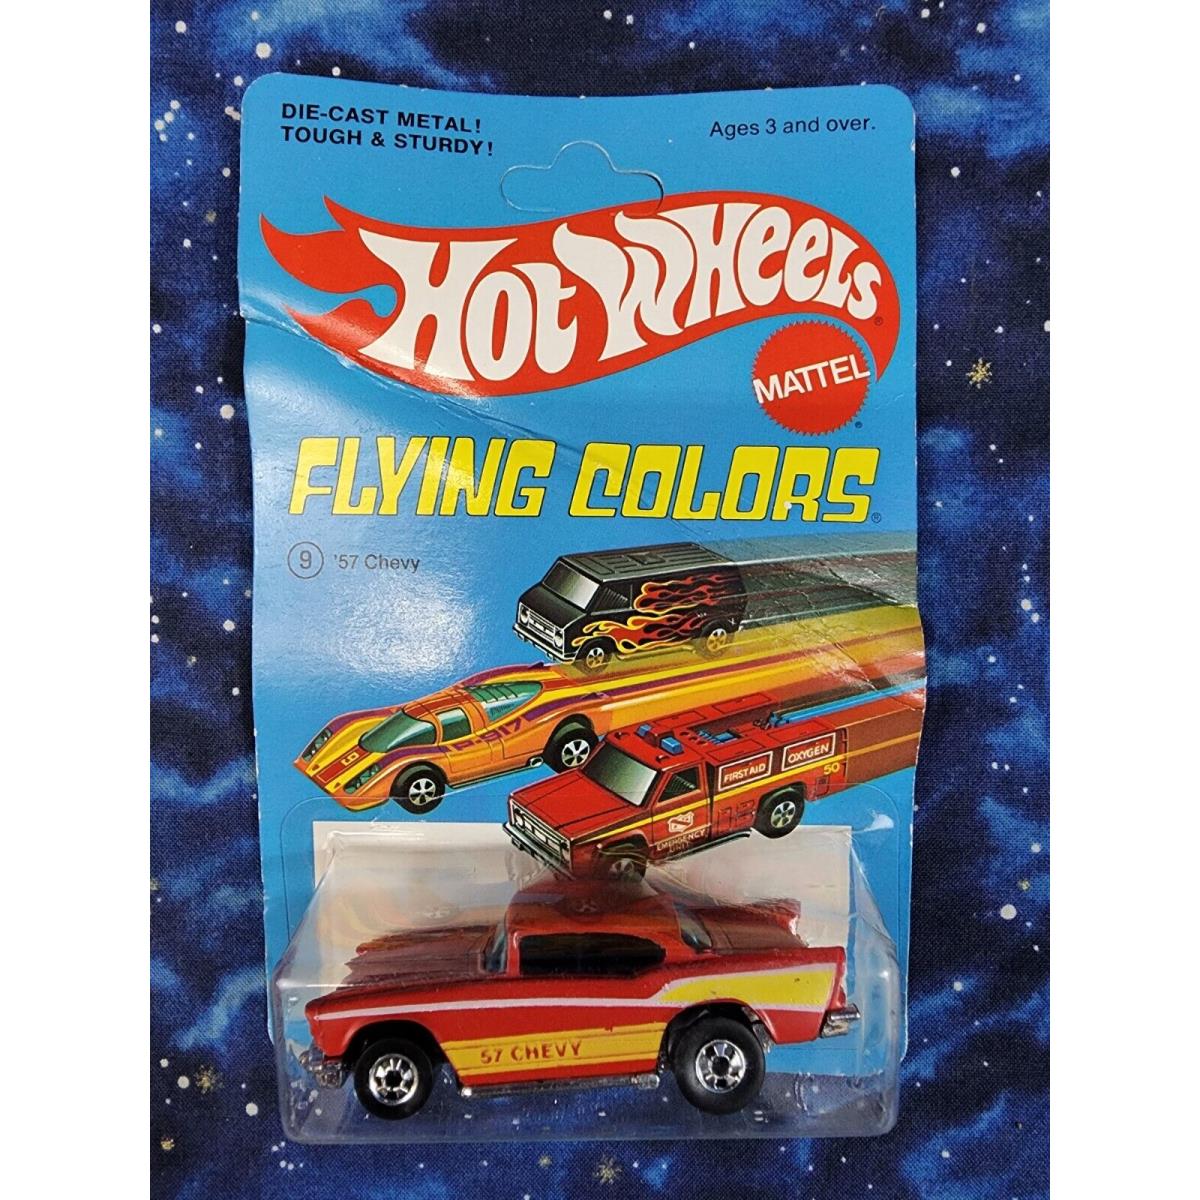 Vintage 1977 Hot Wheels Flying Colors 57 Chevy on Damaged Card 9638